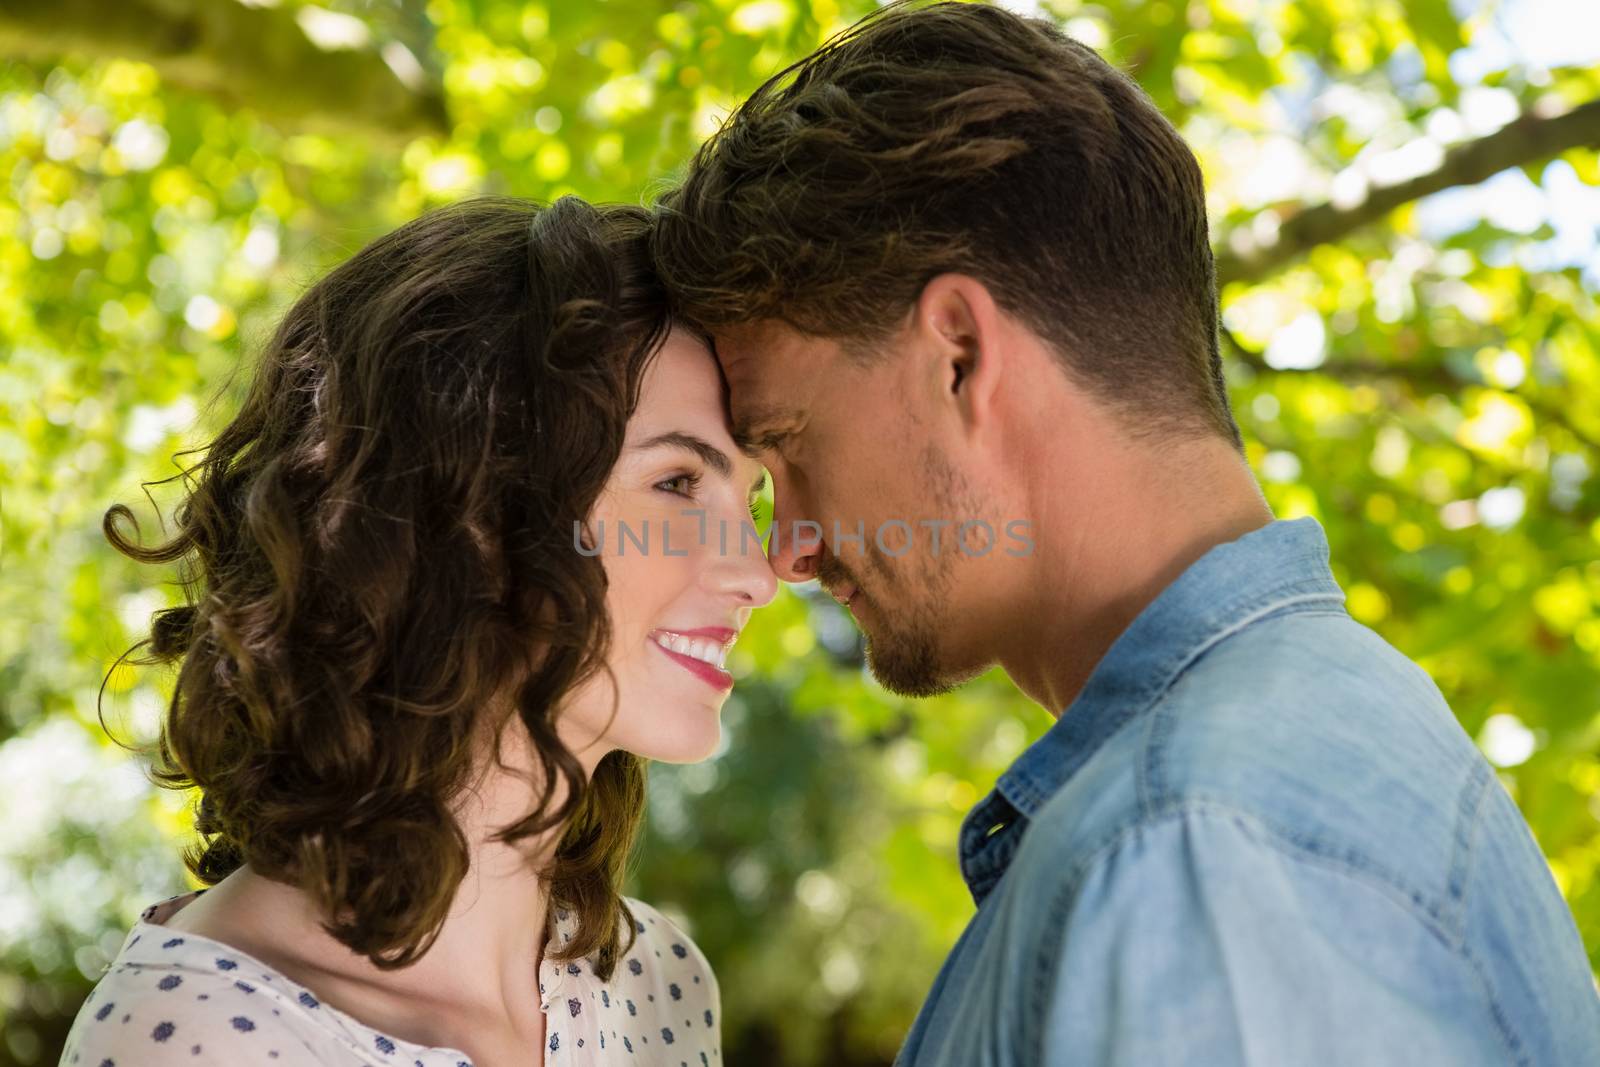 Romantic couple looking face to face in garden by Wavebreakmedia